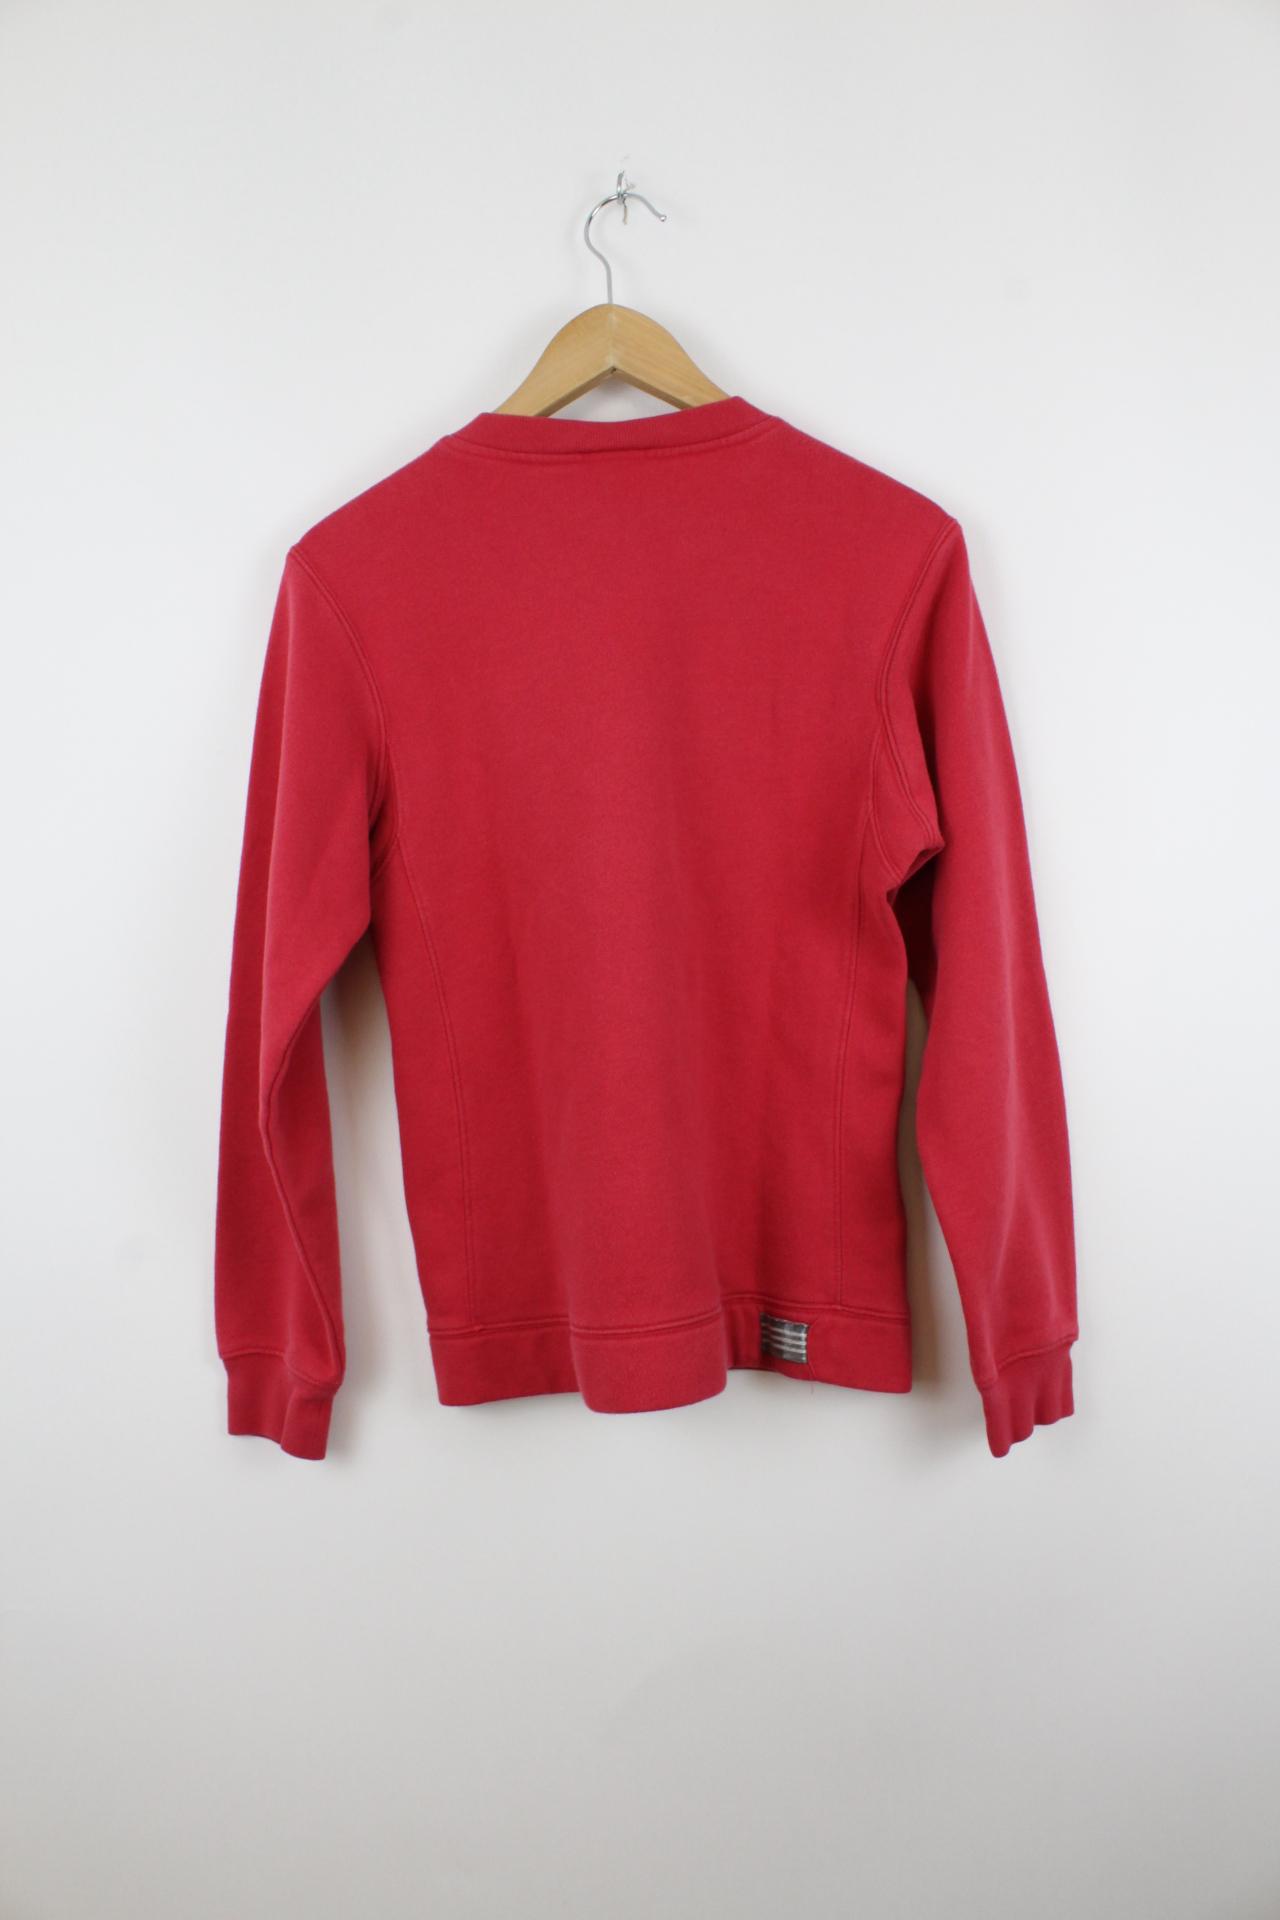 Vintage Adidas Sweater Rot - S